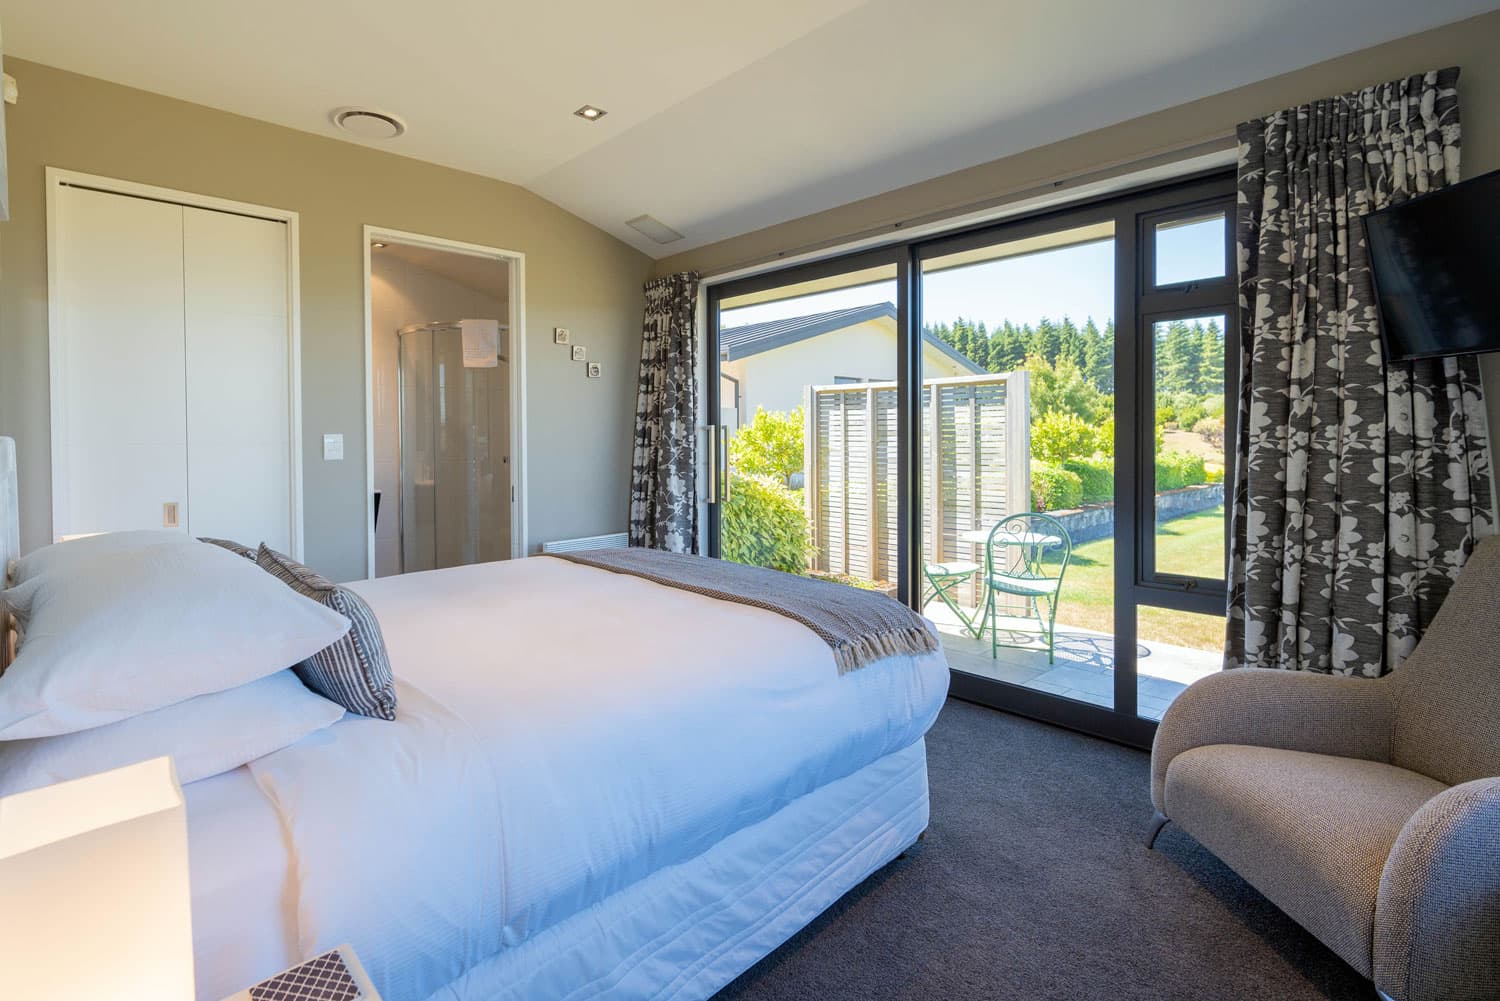 The Takitimu Room at High Leys Lodge Te Anau is warm, light and bright and features a private ensuite and lush garden views.